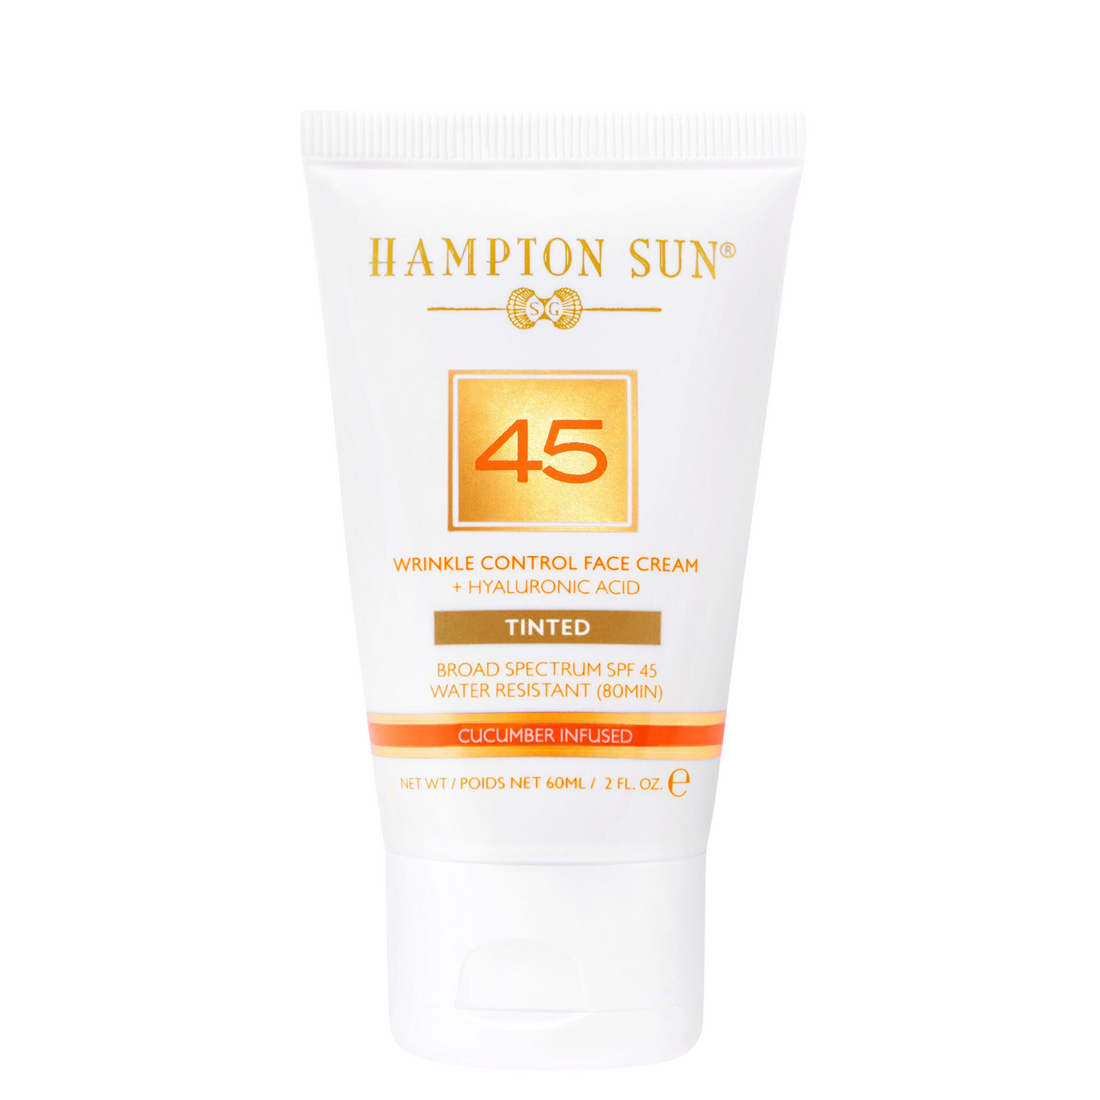 Tinted SPF 45 Wrinkle Control Face Cream